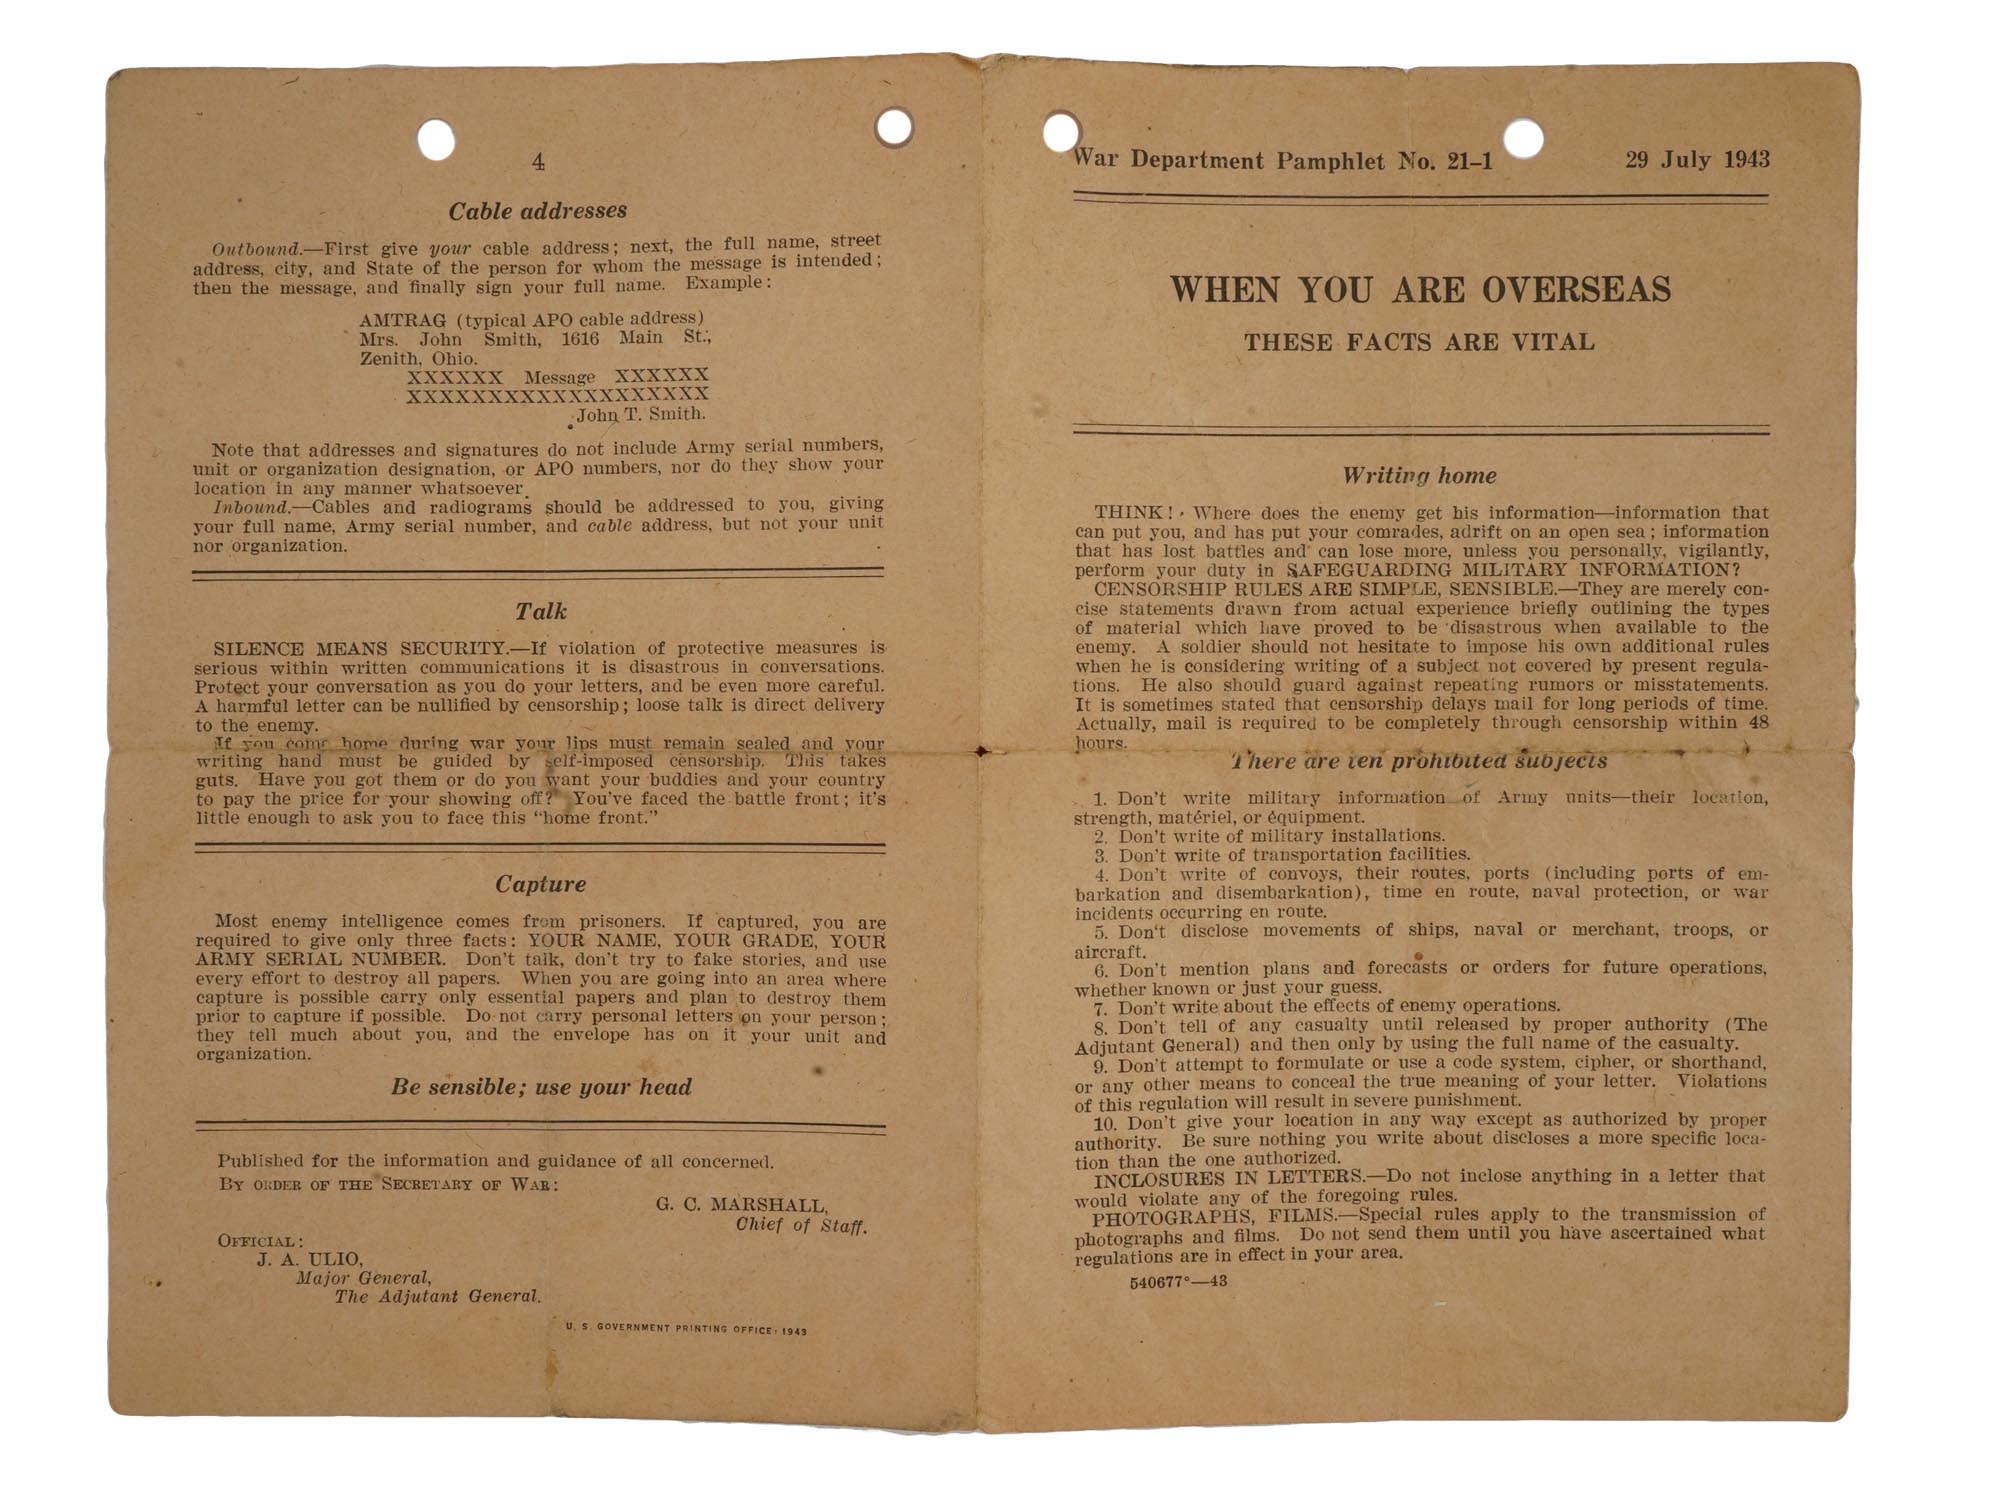 29 JULY 1943 US WAR DEPARTMENT PAMPHLET NO 21 1 TEXT PIC-1